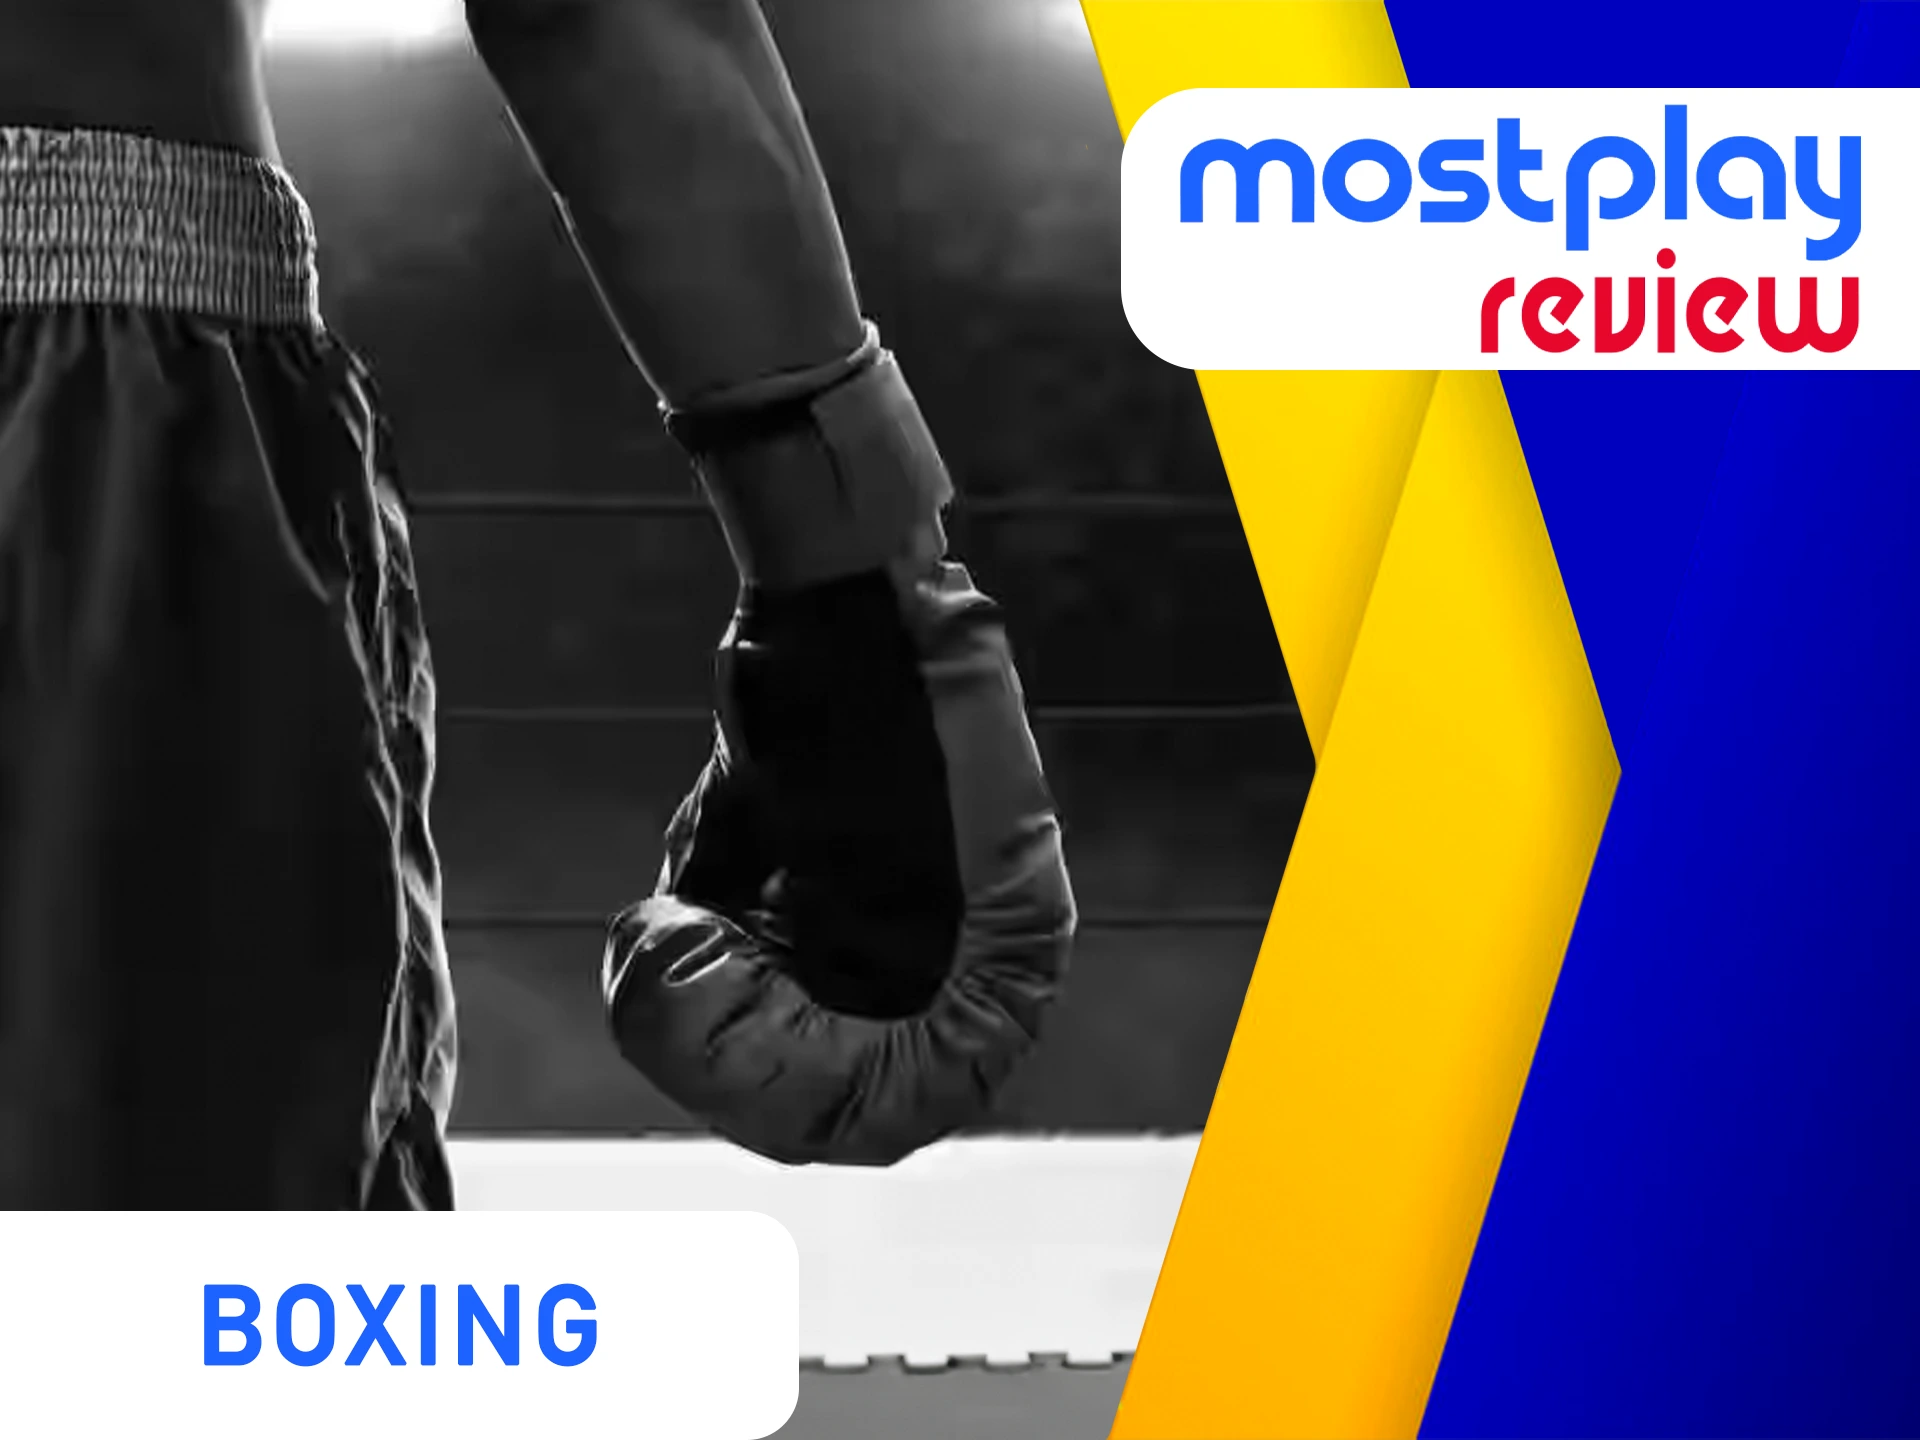 Bet on legendary boxers at Mostplay.